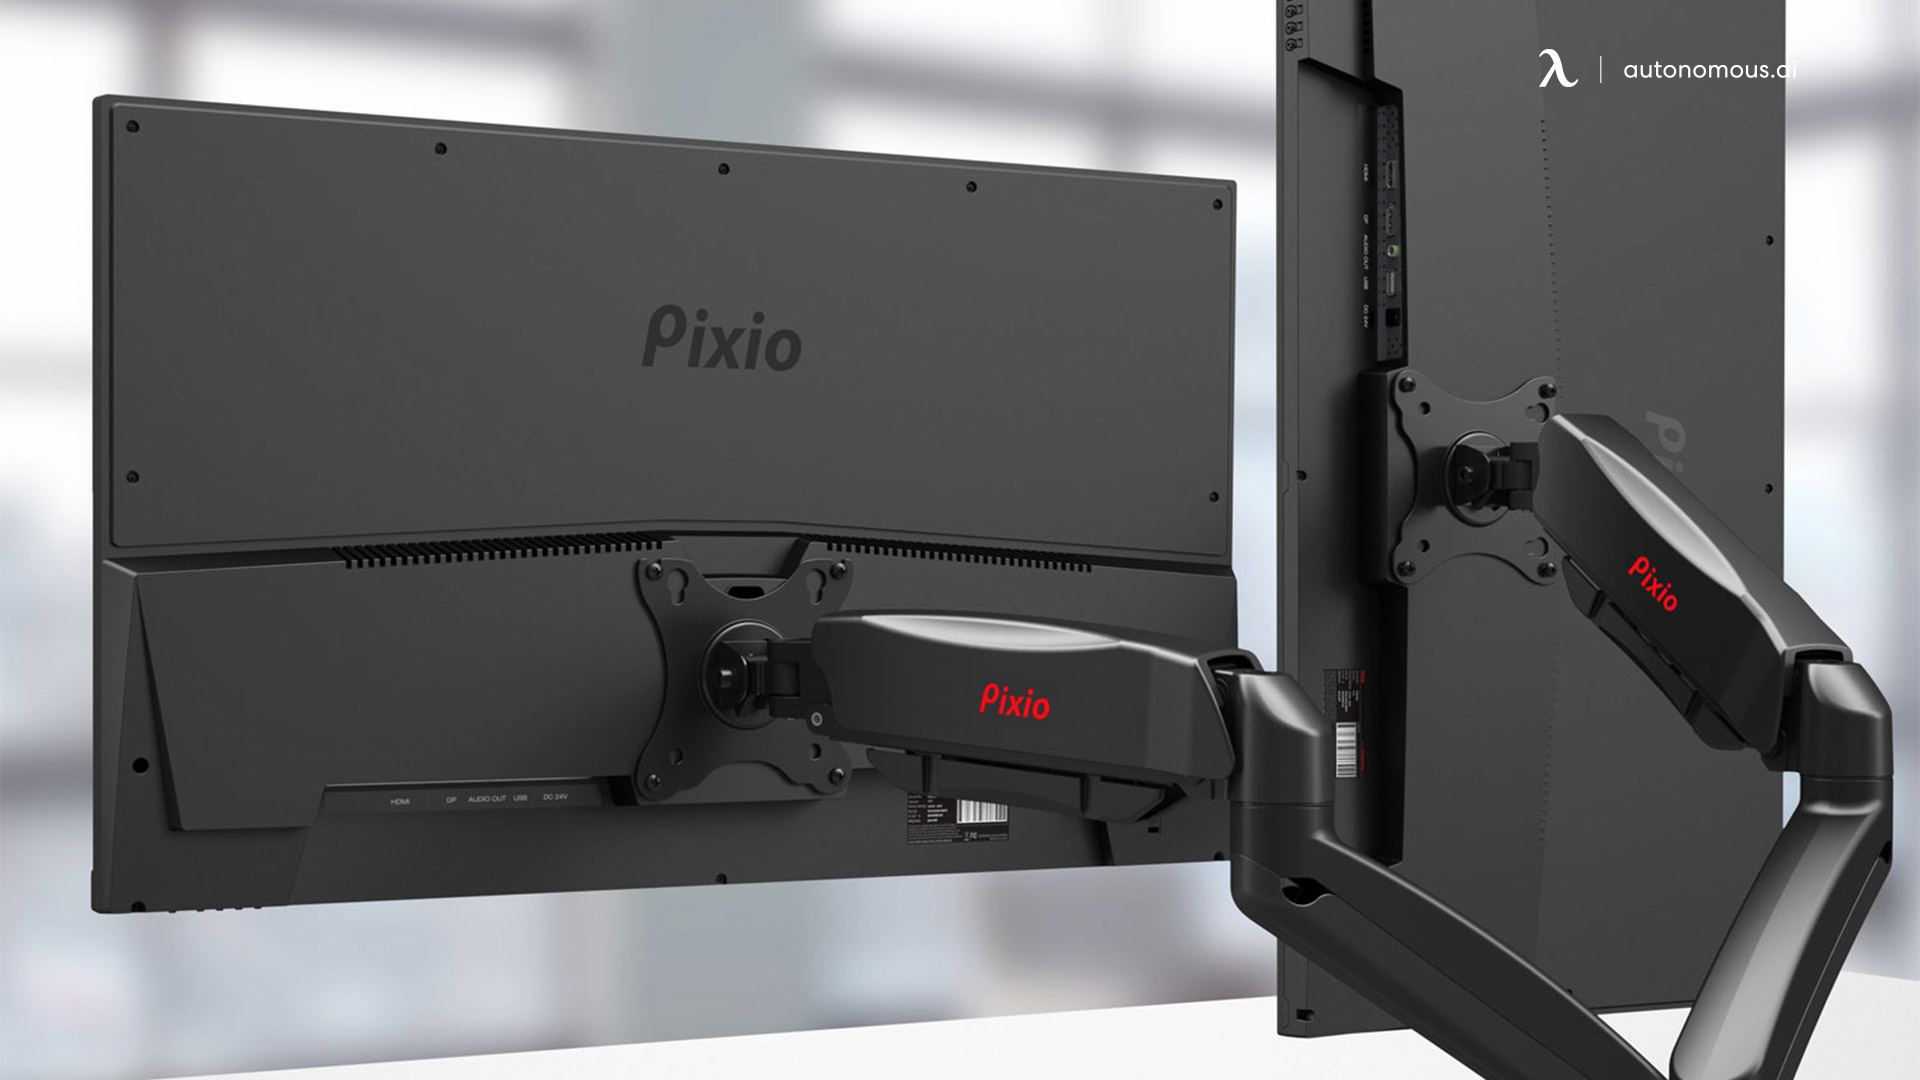 Can the Monitor Arm Fit the Monitor?